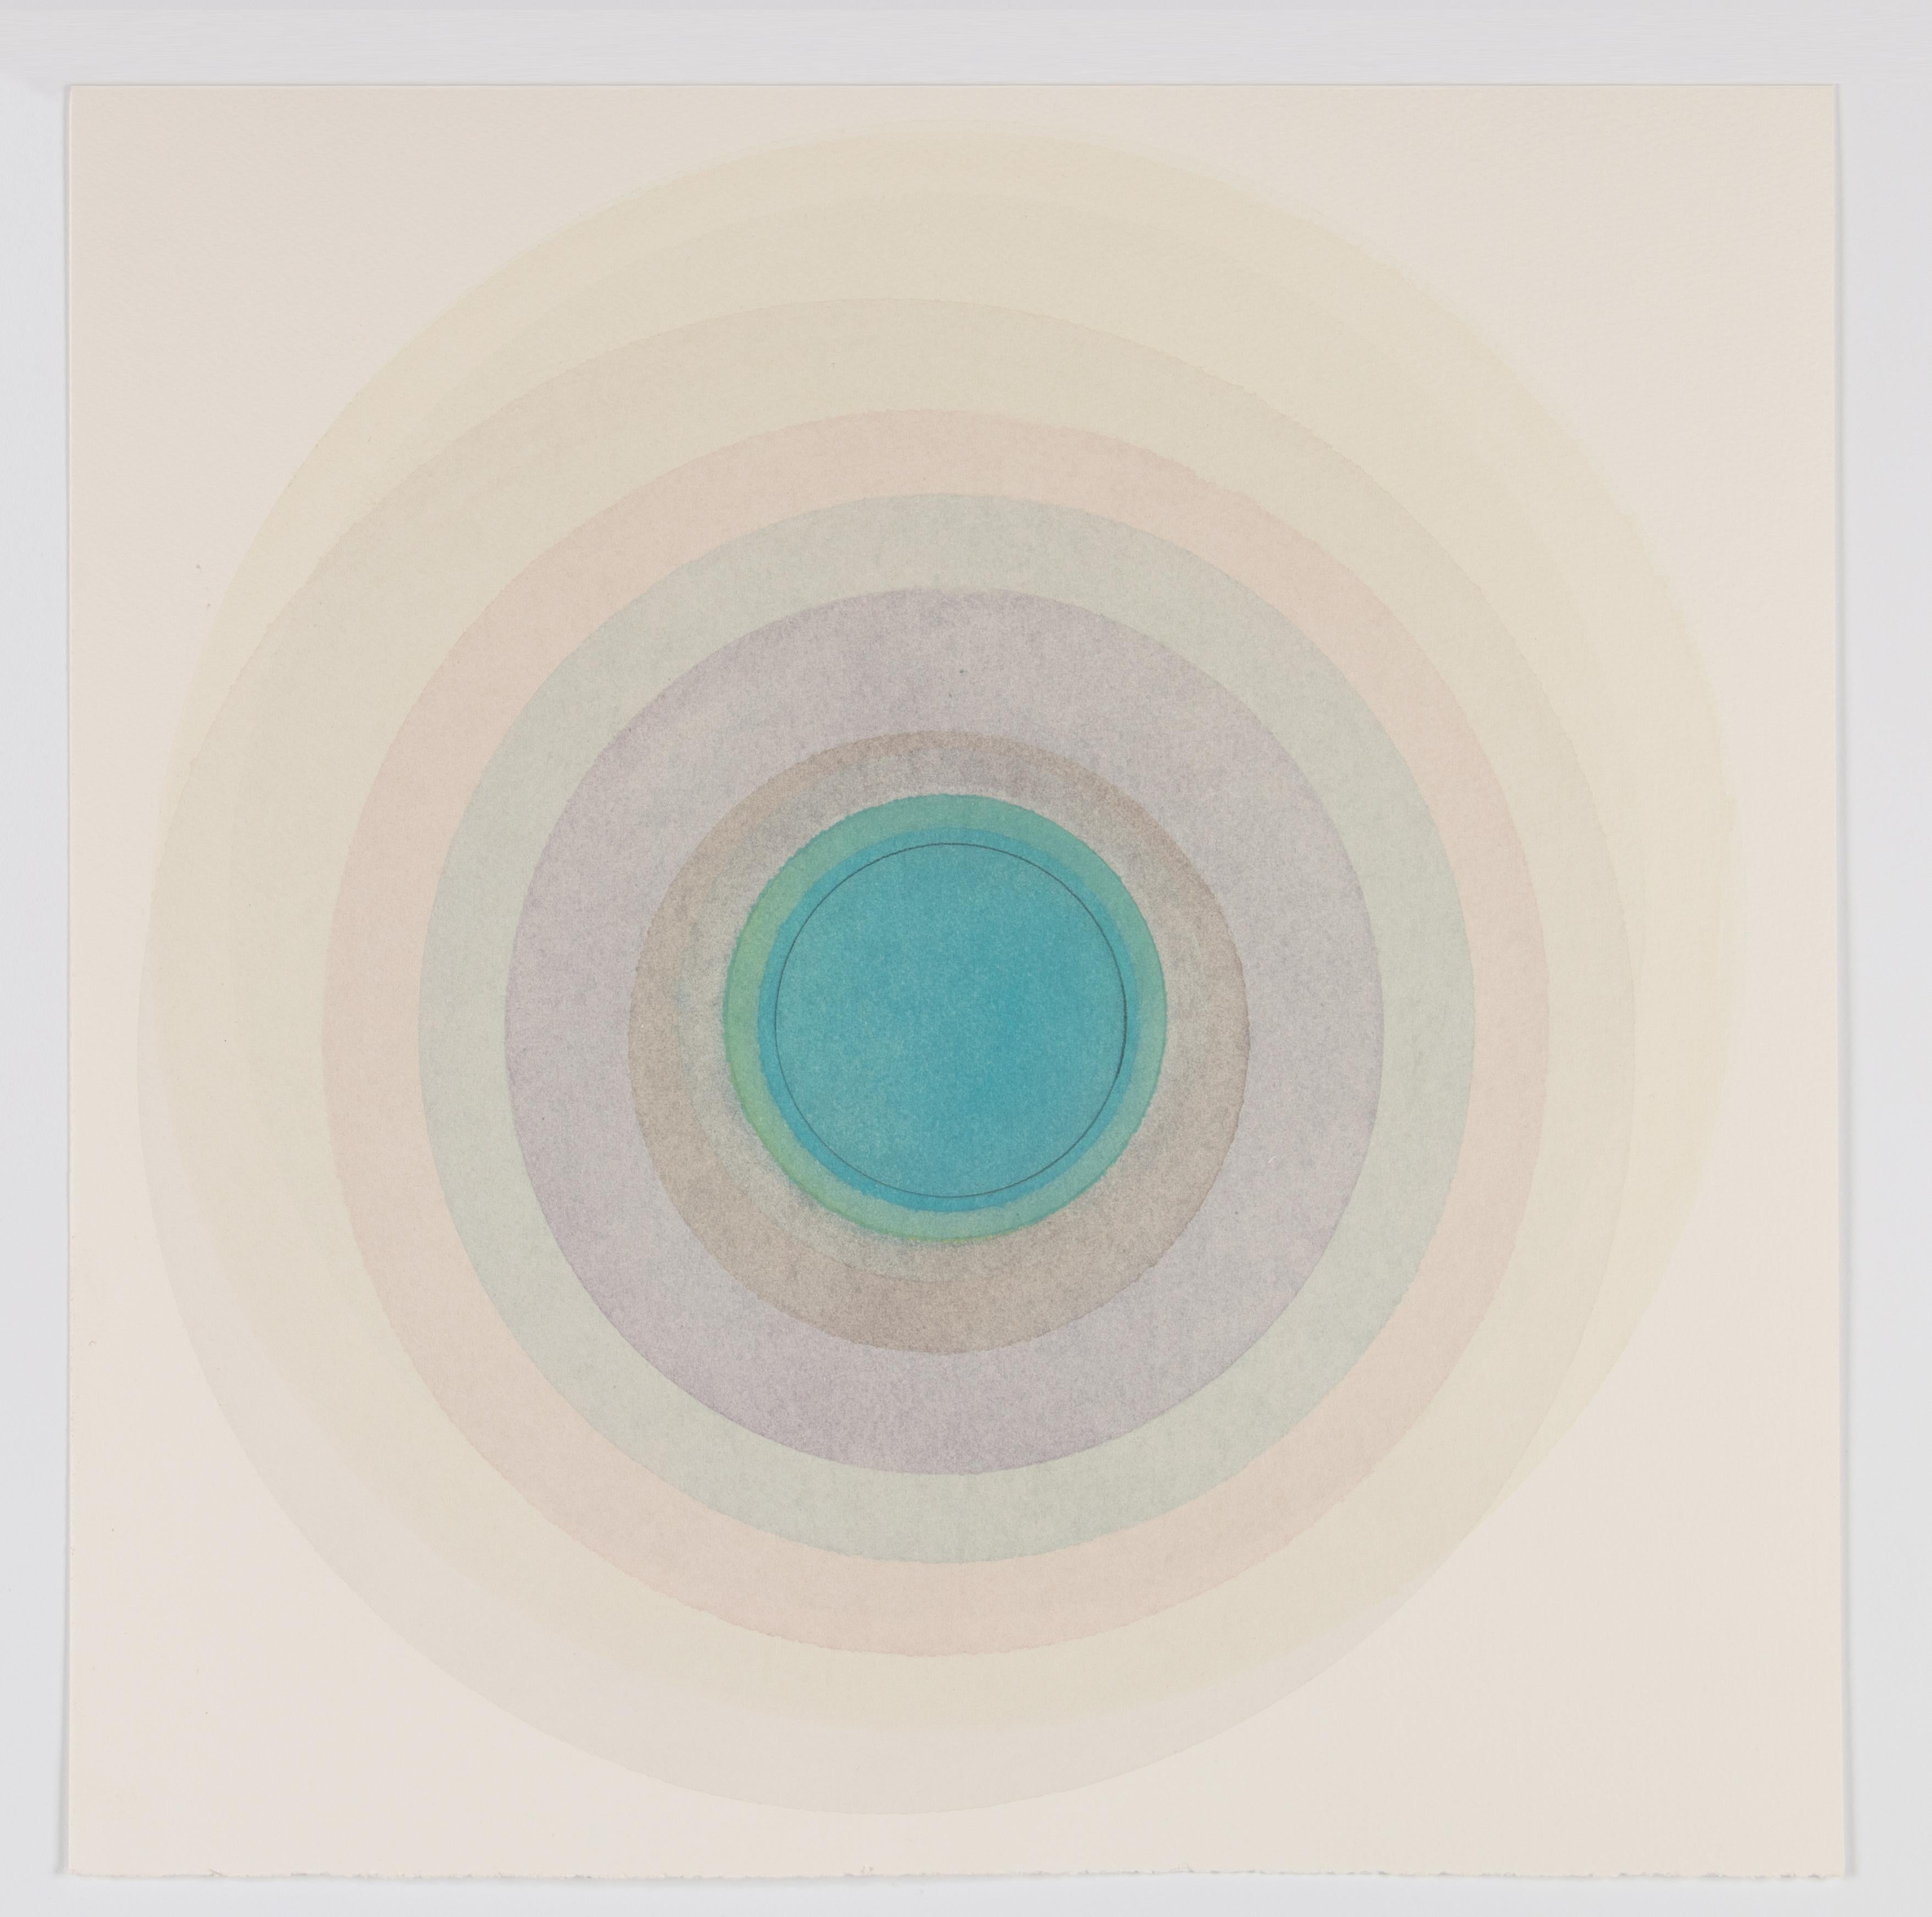 Evan Venegas Abstract Drawing - Coaxist 10819 - Soft pastel color abstract geometric circle watercolor on paper